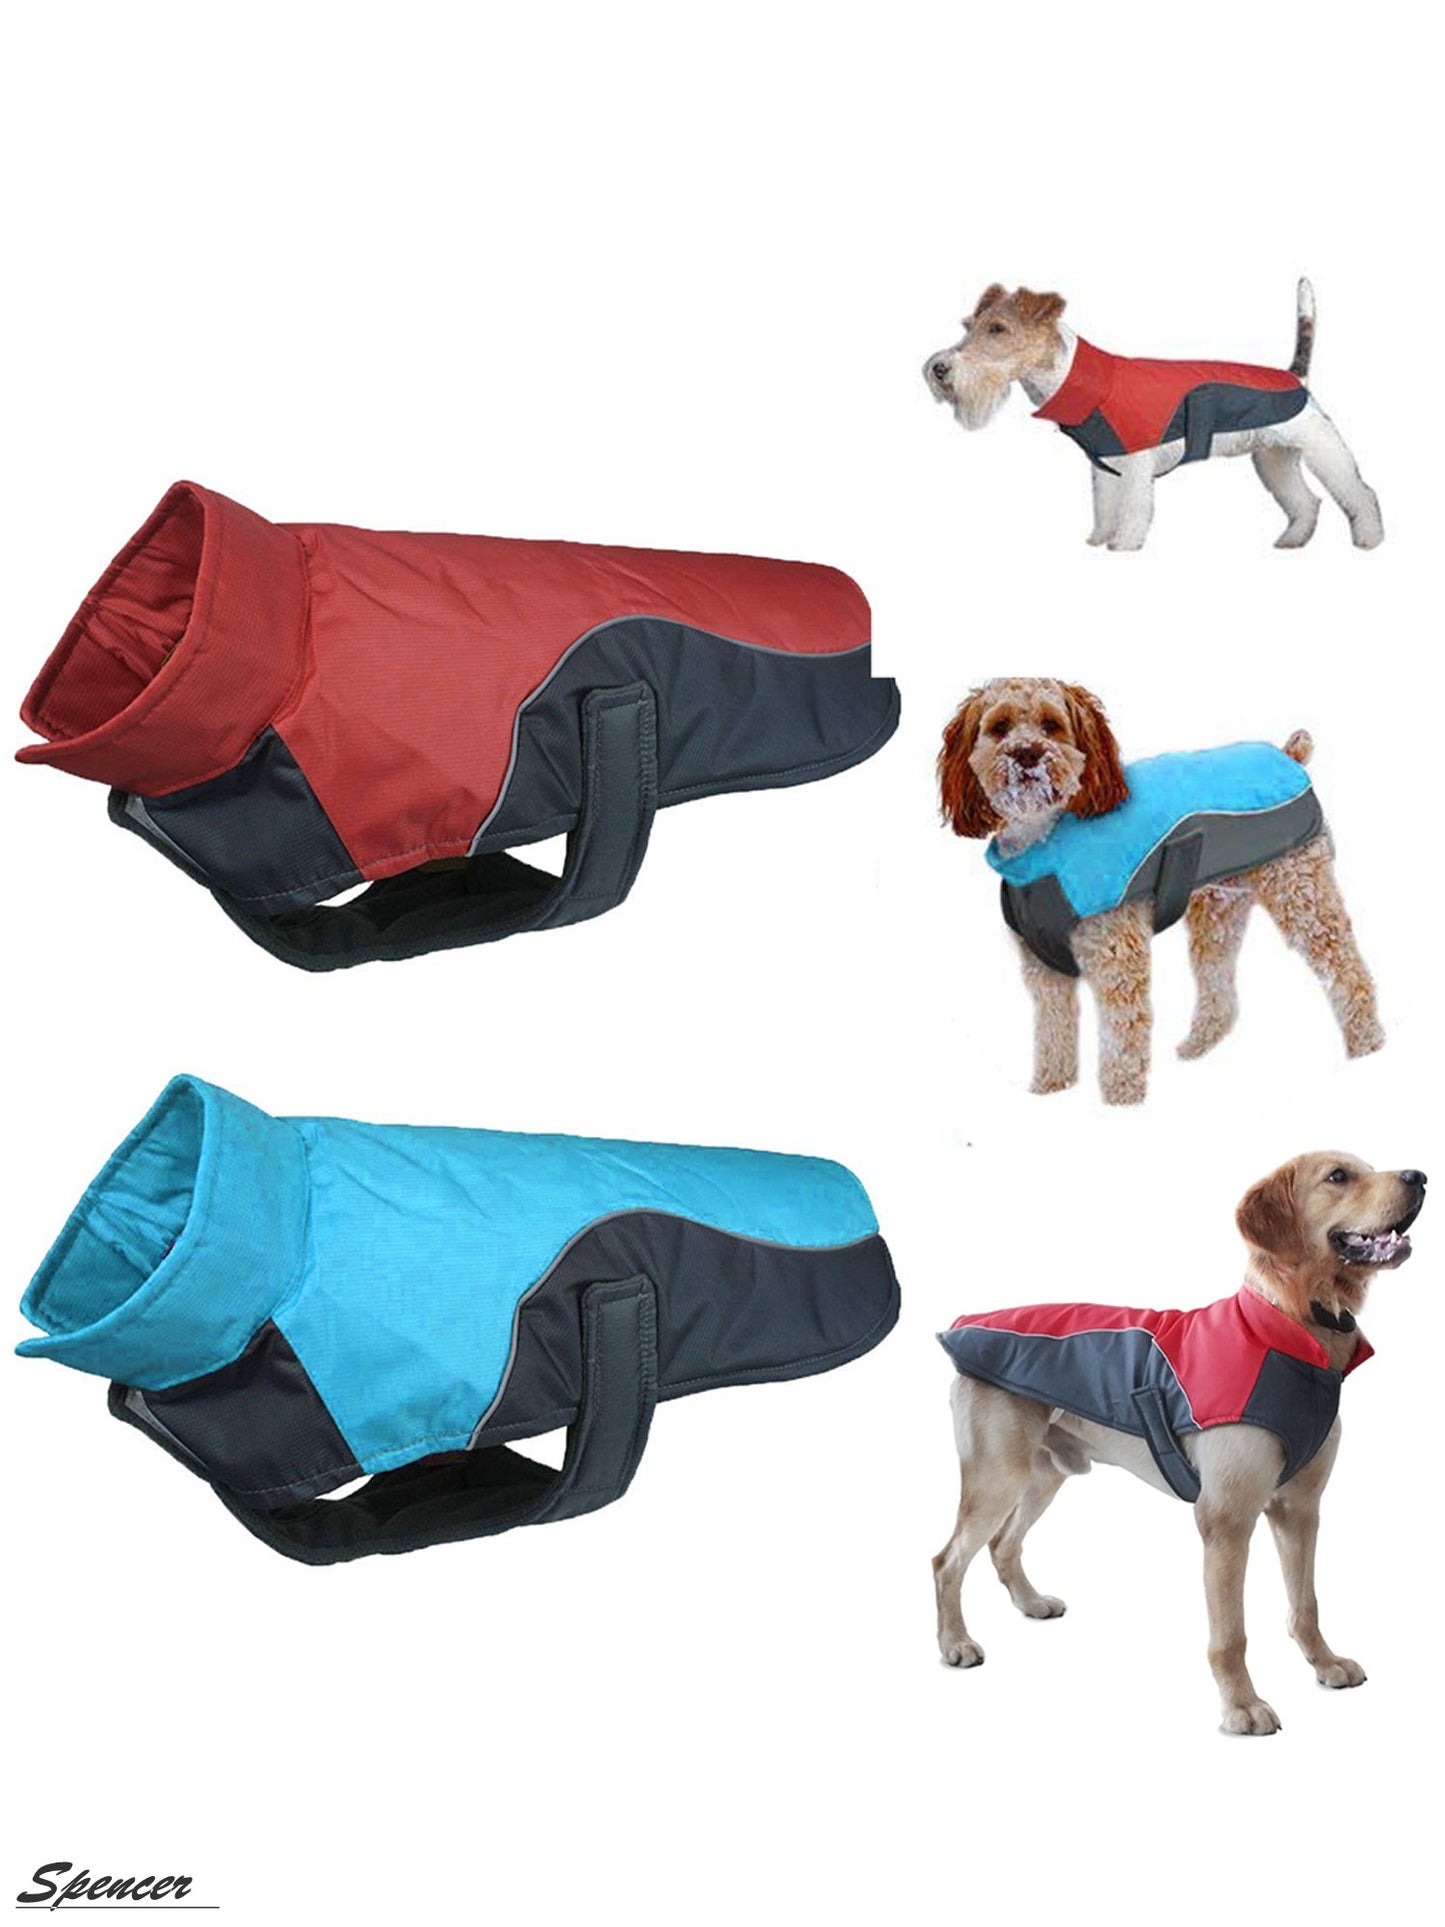 Spencer Winter Dog Coat Vest Windproof Reflective Warm Dog Jackets Pet Apparel for Small Medium Large Dogs Outdoor Walking "M-5XL"